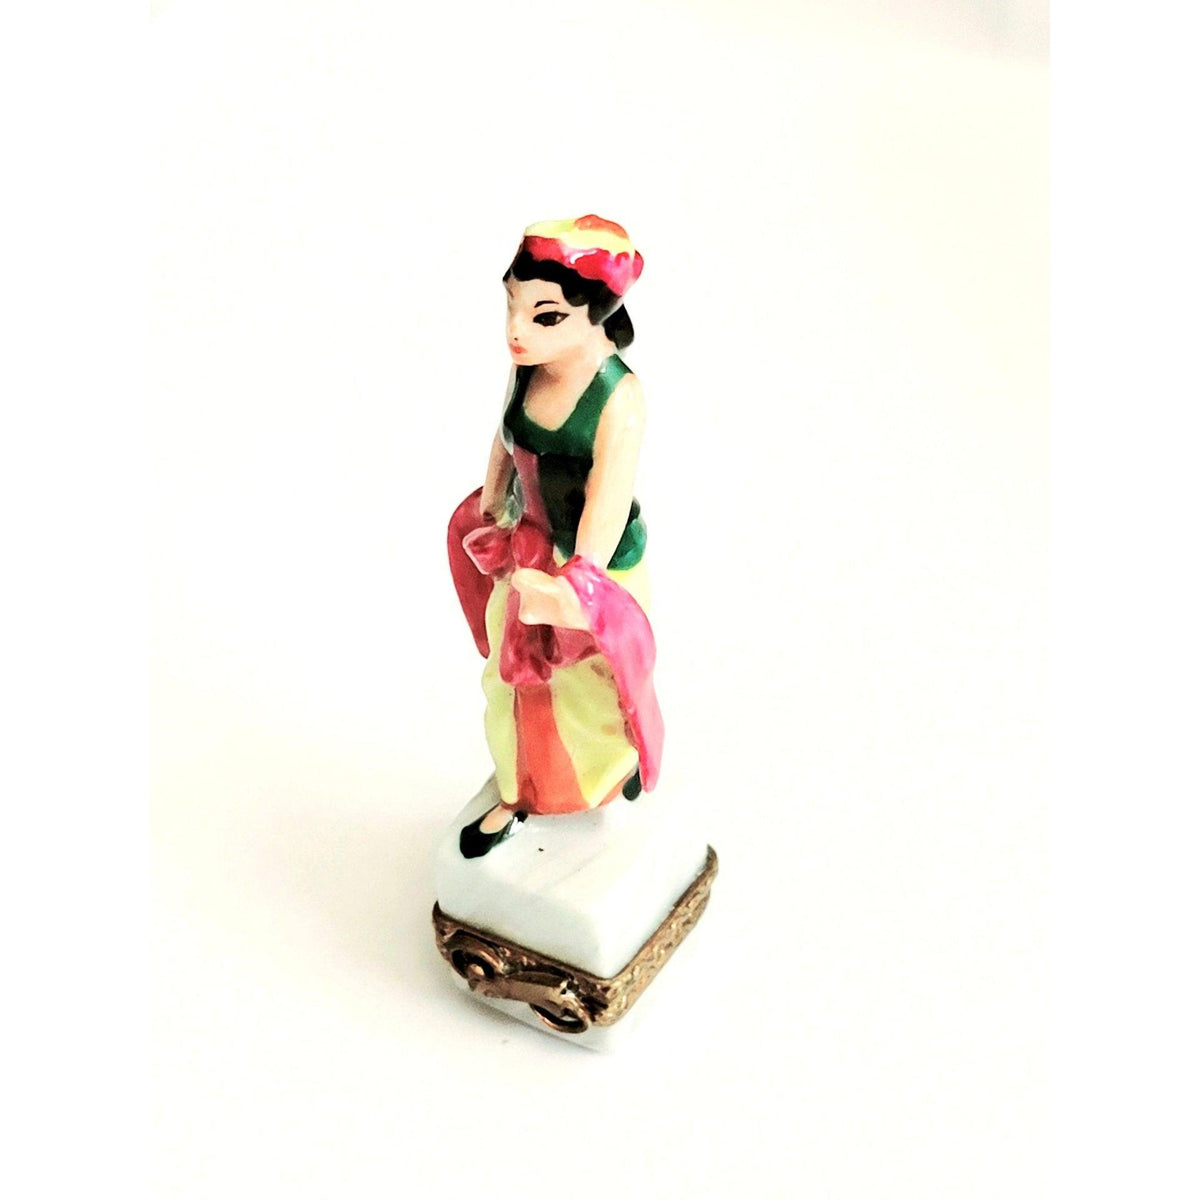 Small French Woman Gypsy Girl Limoges Box Figurine - Limoges Box Boutique